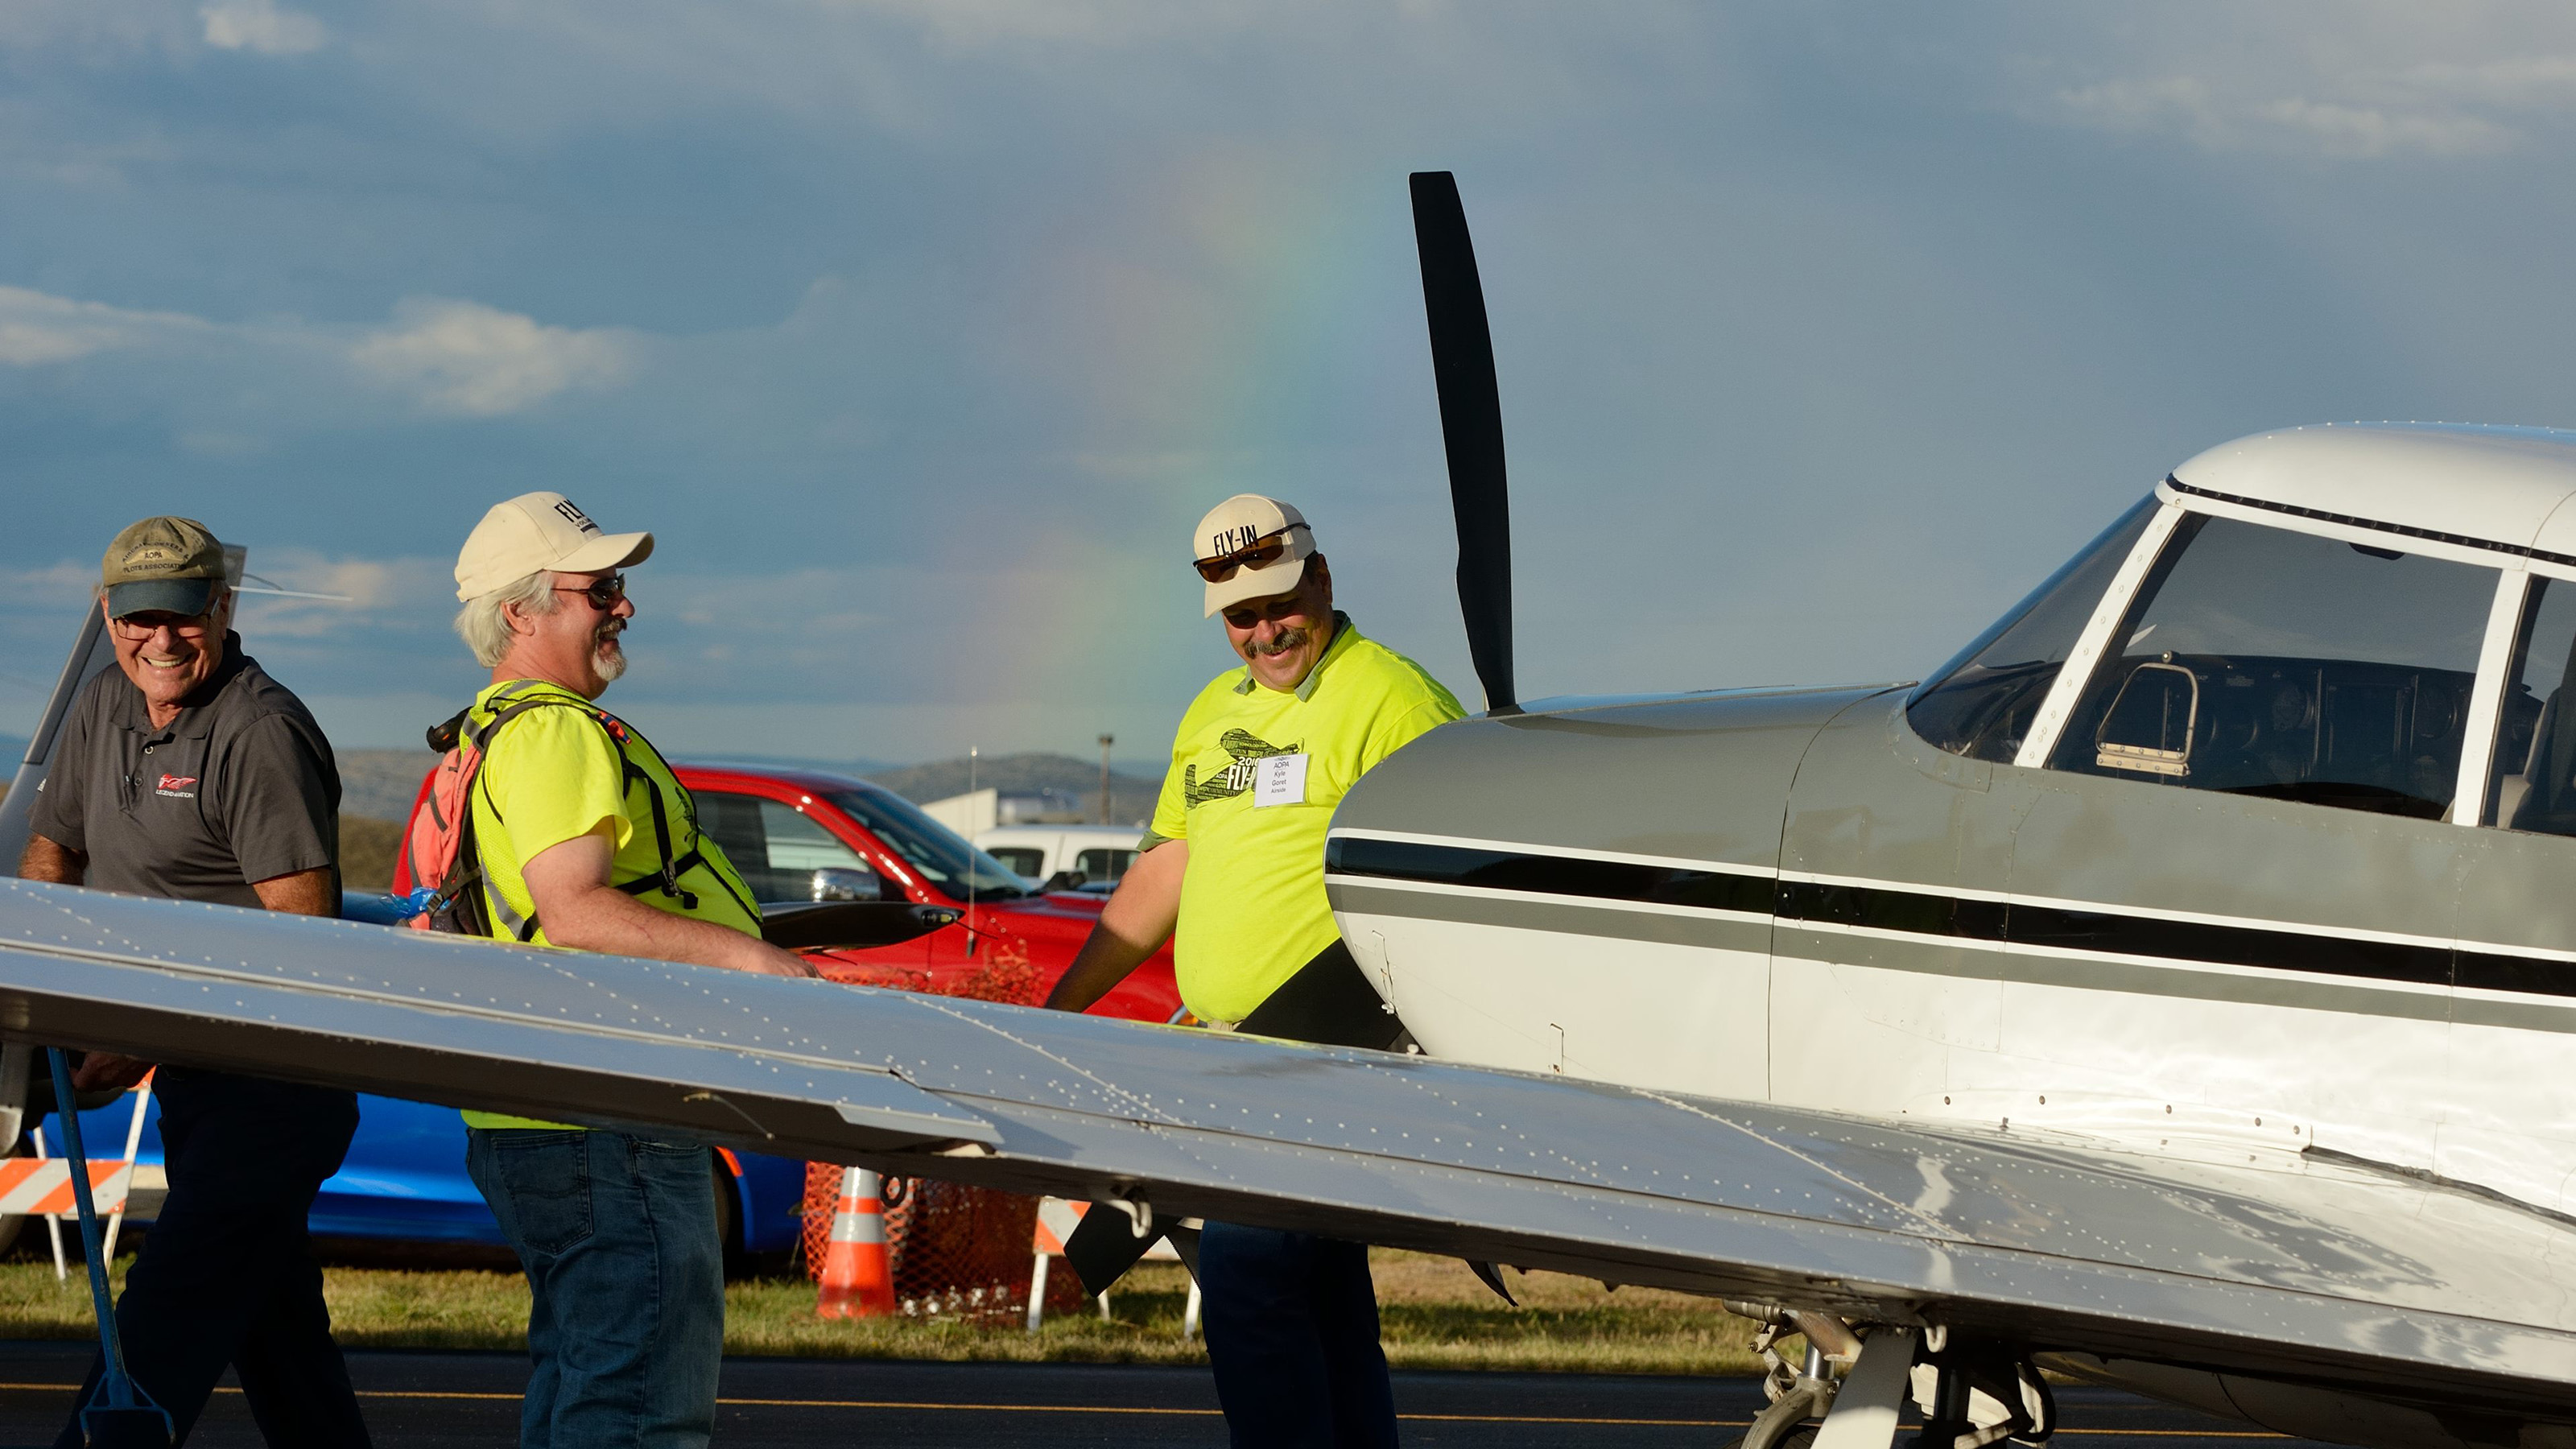 Airside volunteers share a laugh after positioning a Piper Comanche in the static display. A rainbow gives evidence of an afternoon rainshower. Photo by Mike Collins.